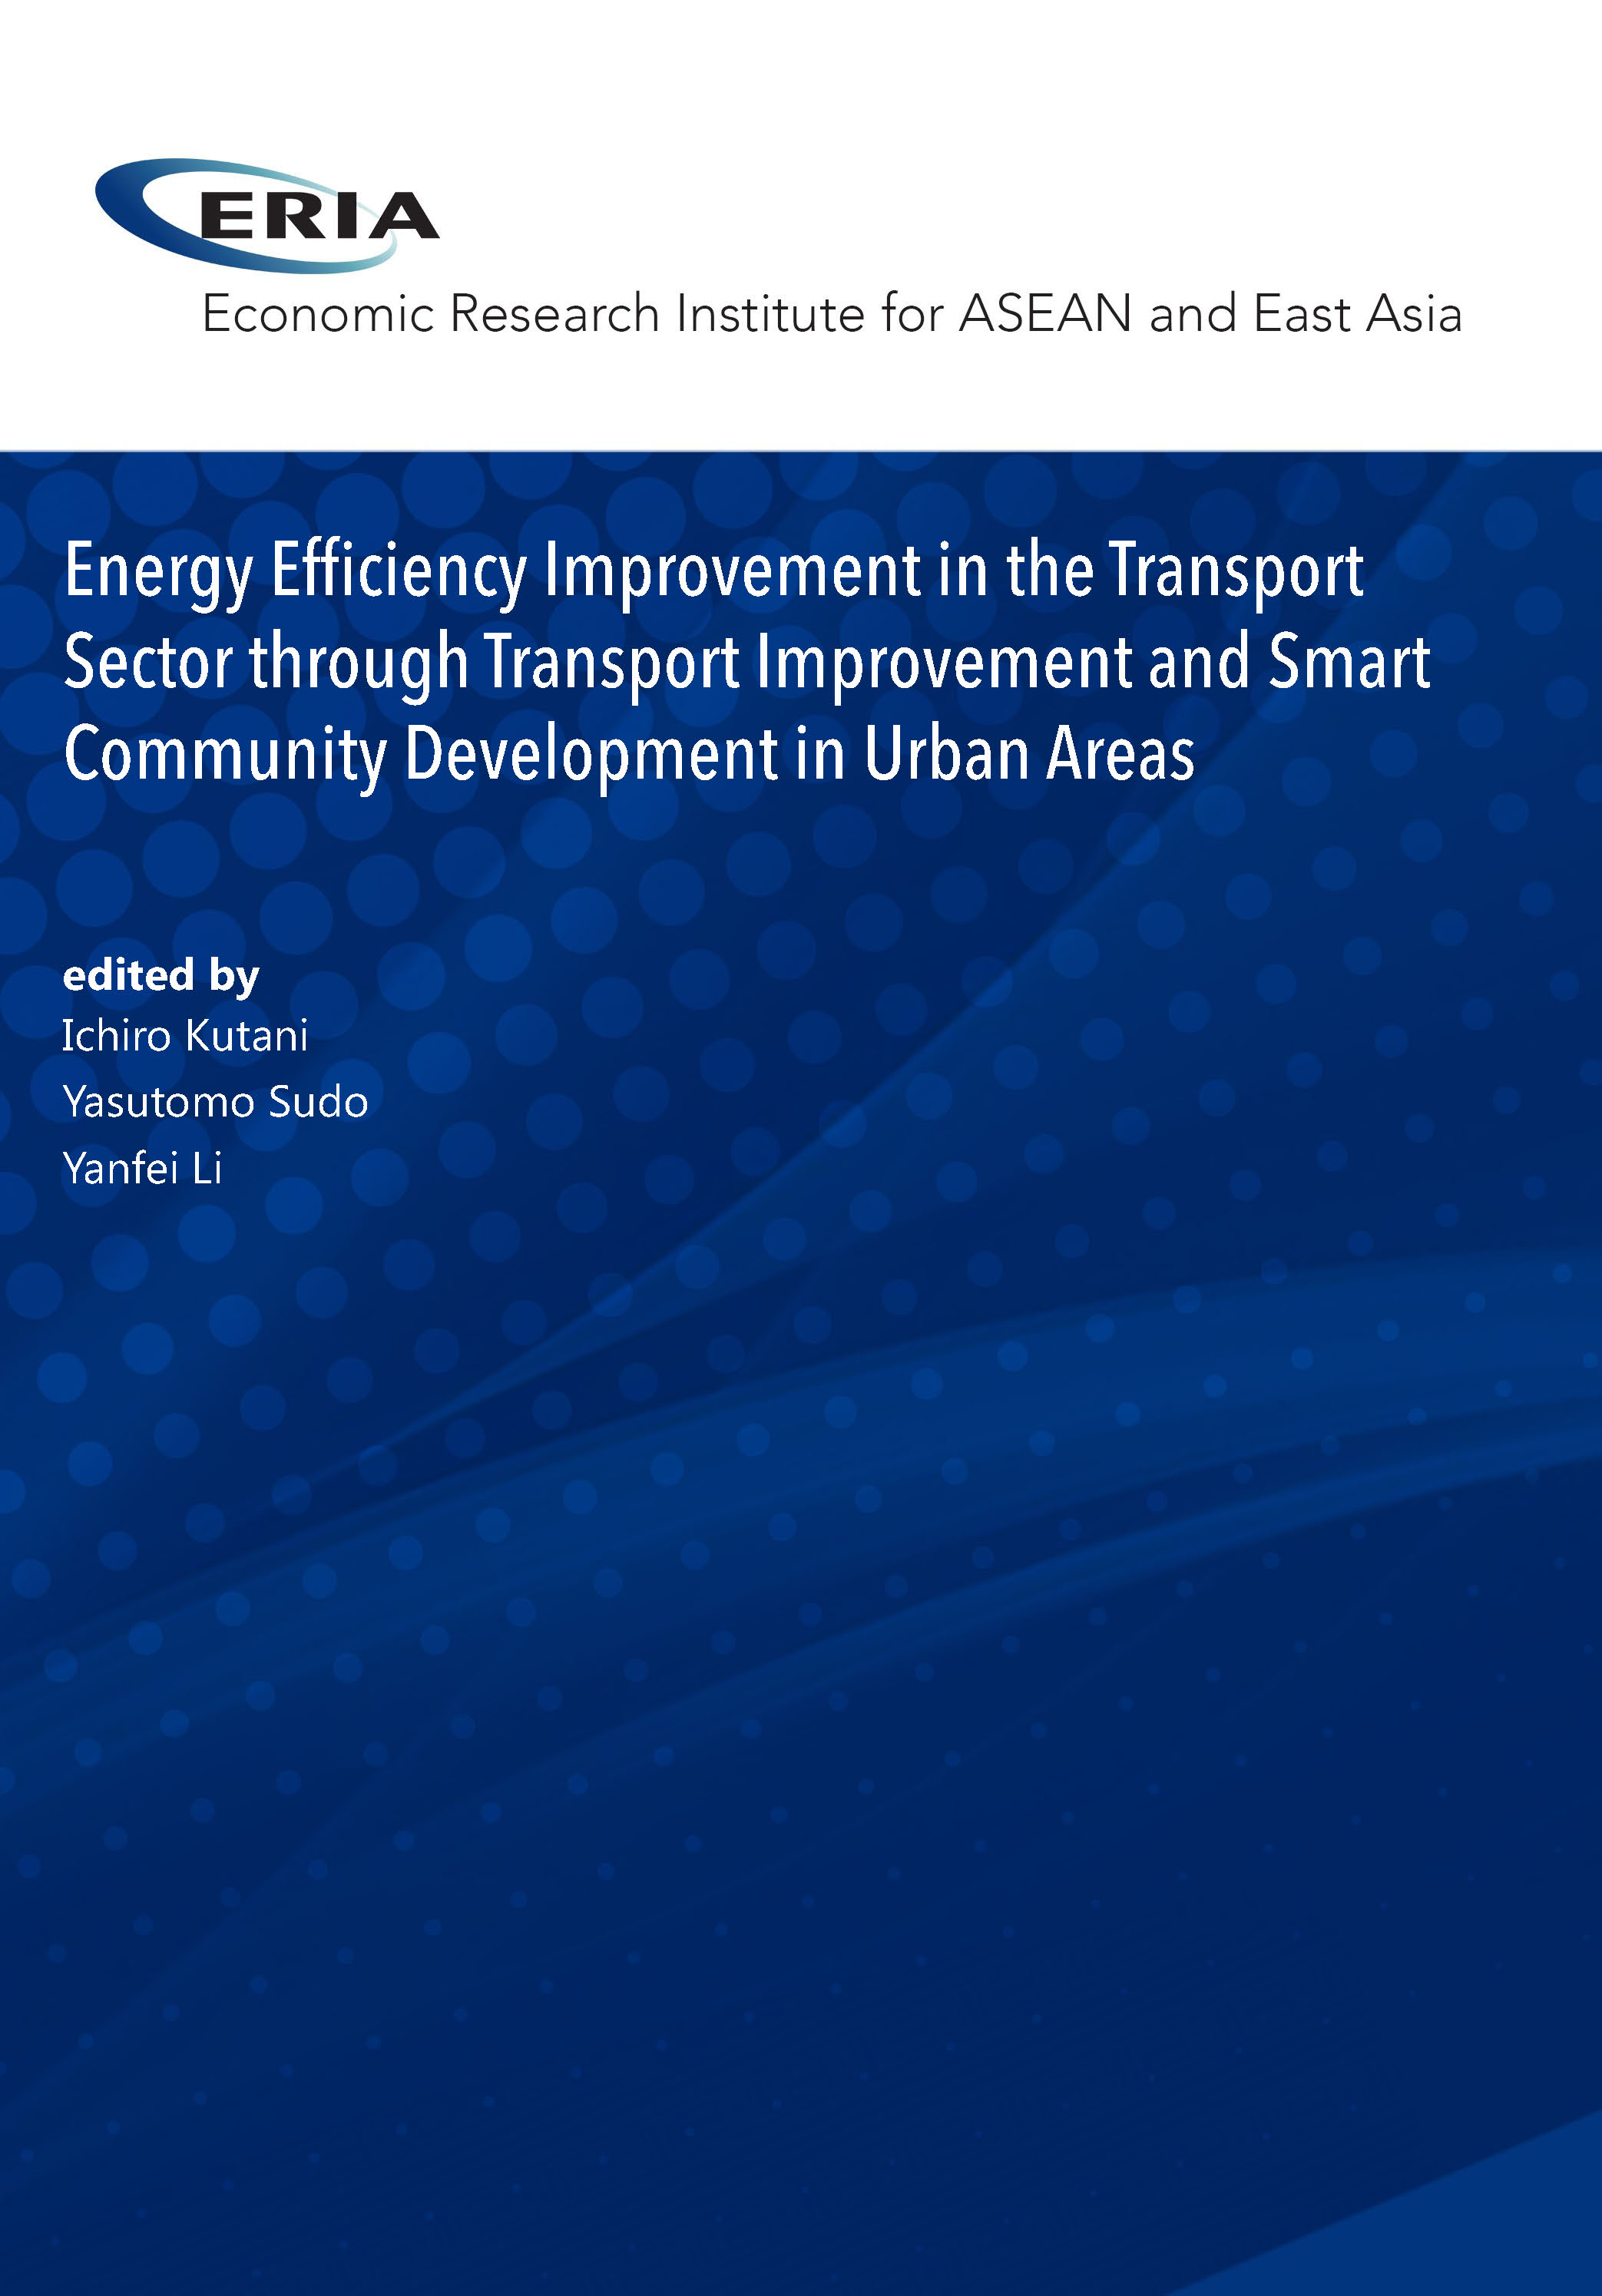 Energy Efficiency Improvement in the Transport Sector through Transport Improvement and Smart Community Development in Urban Areas